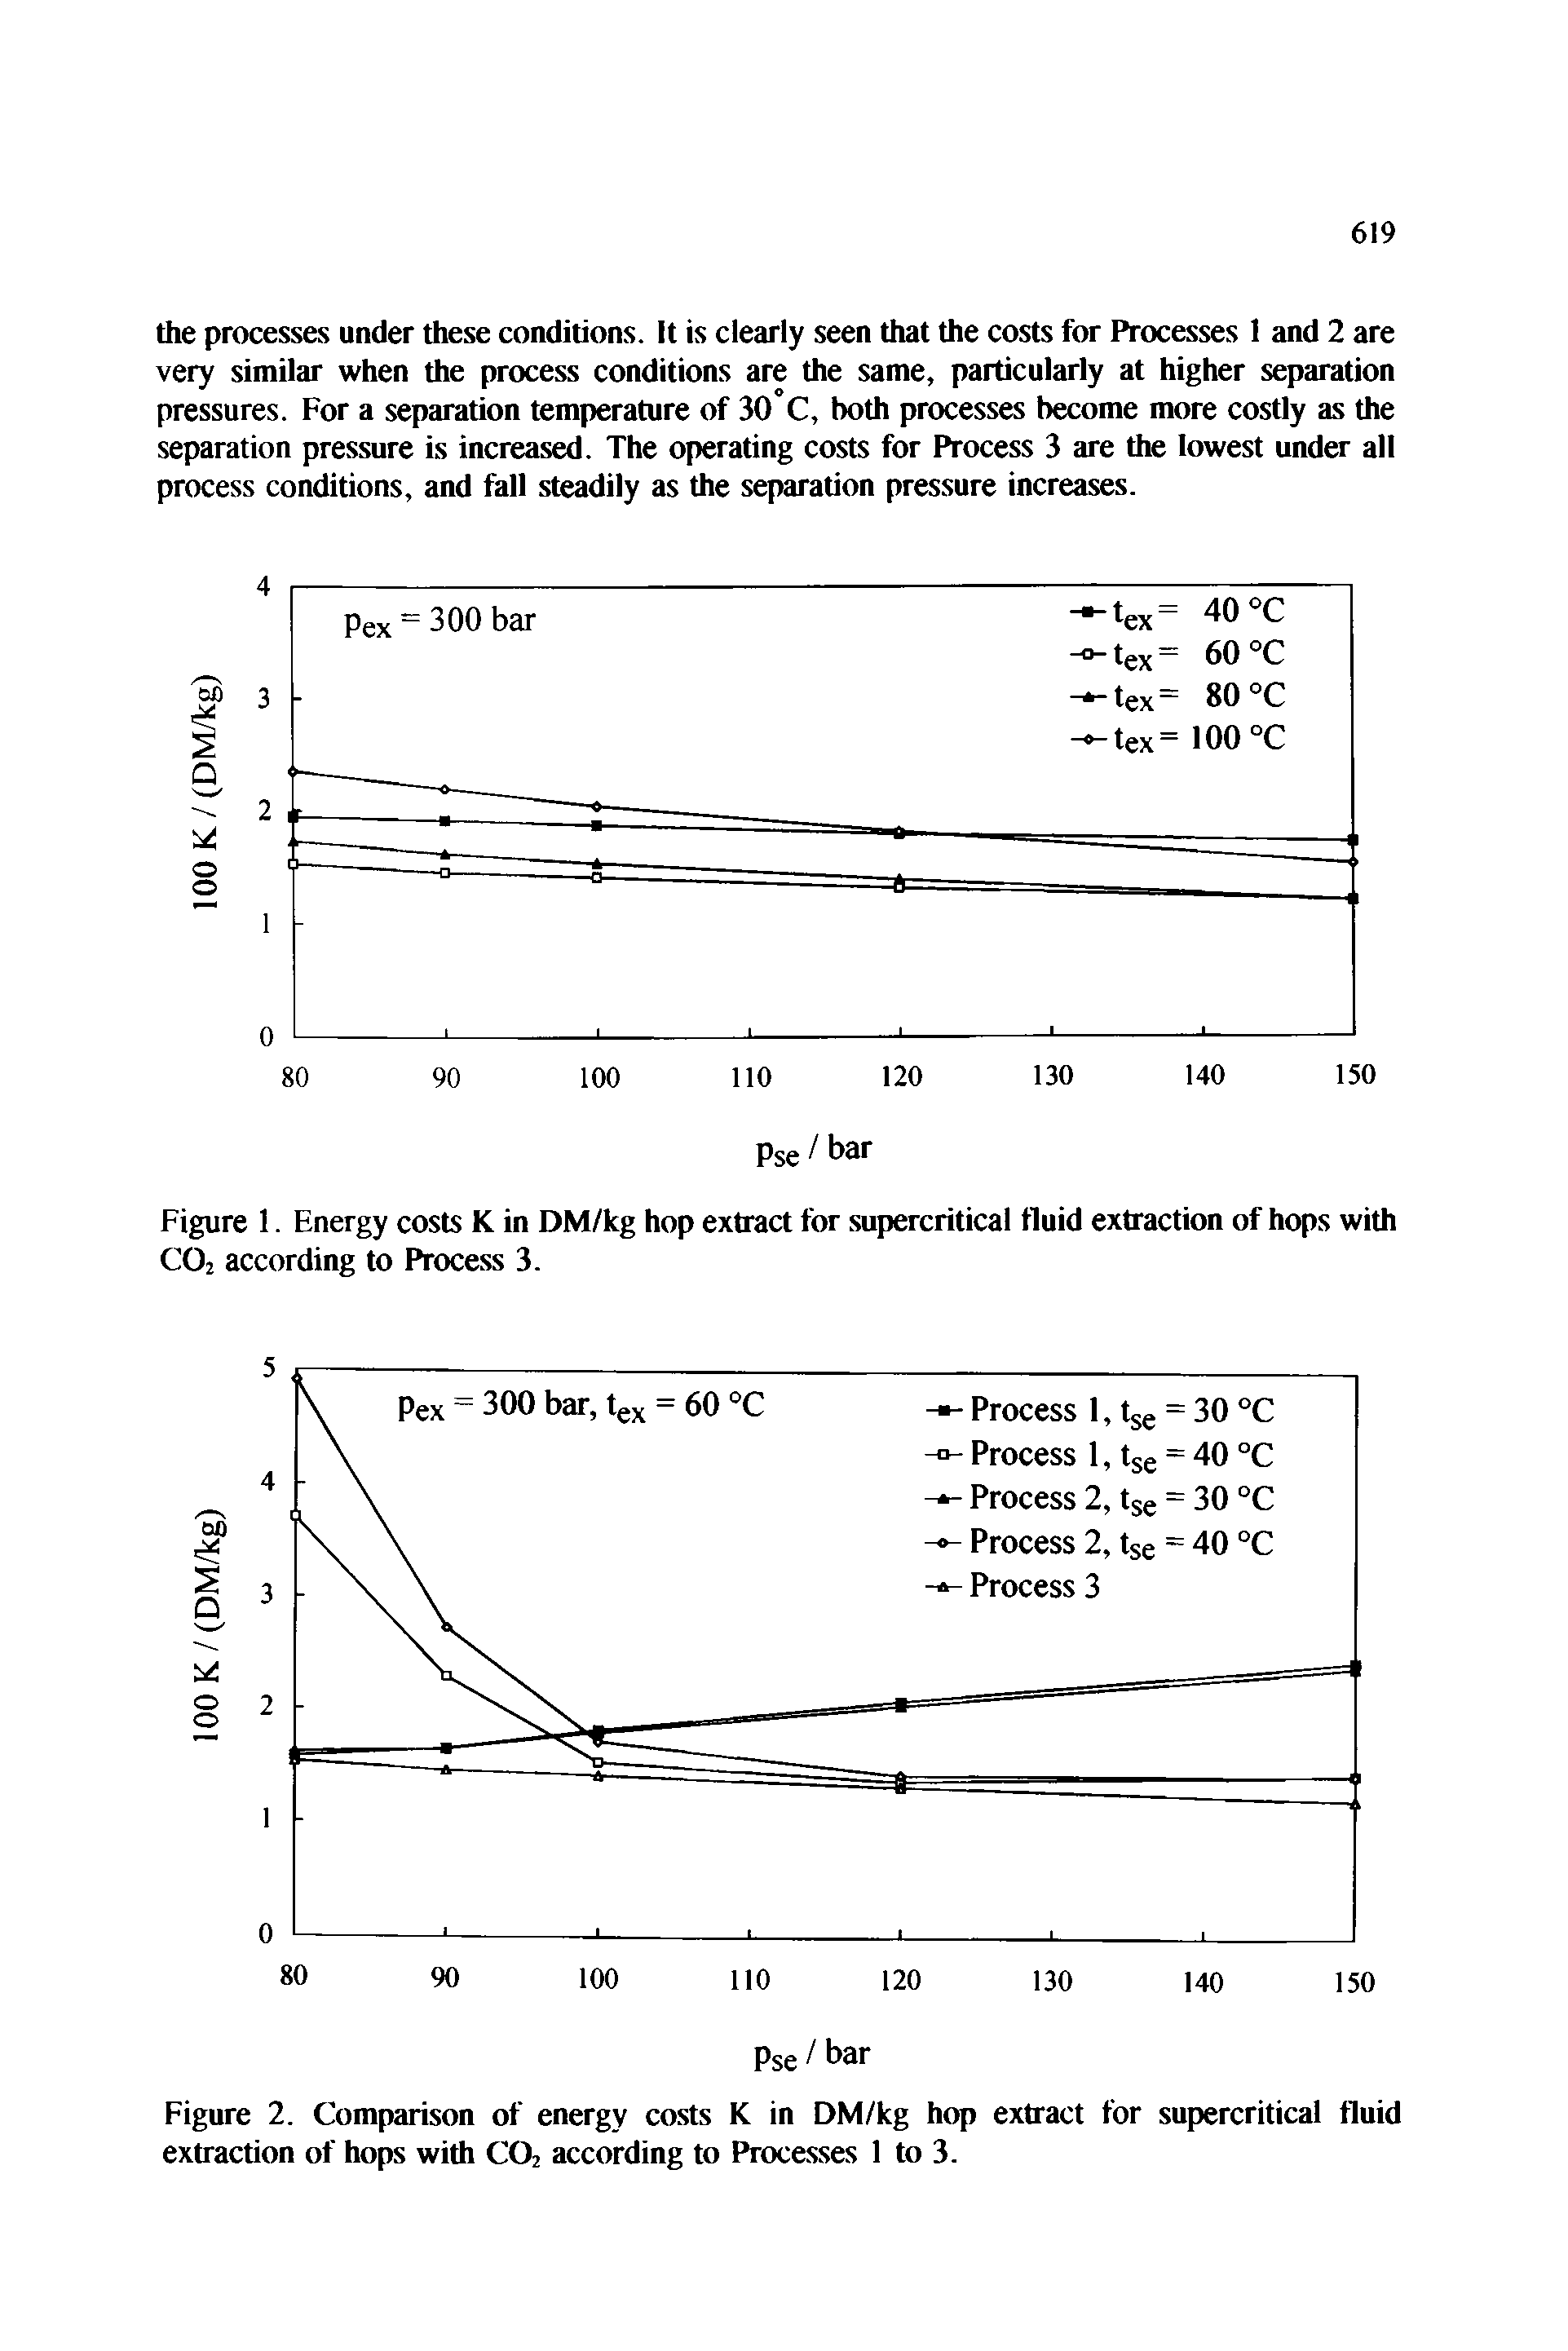 Figure 1. Energy costs K in DM/kg hop extract for supercritical fluid extraction of hops with C02 according to Process 3.